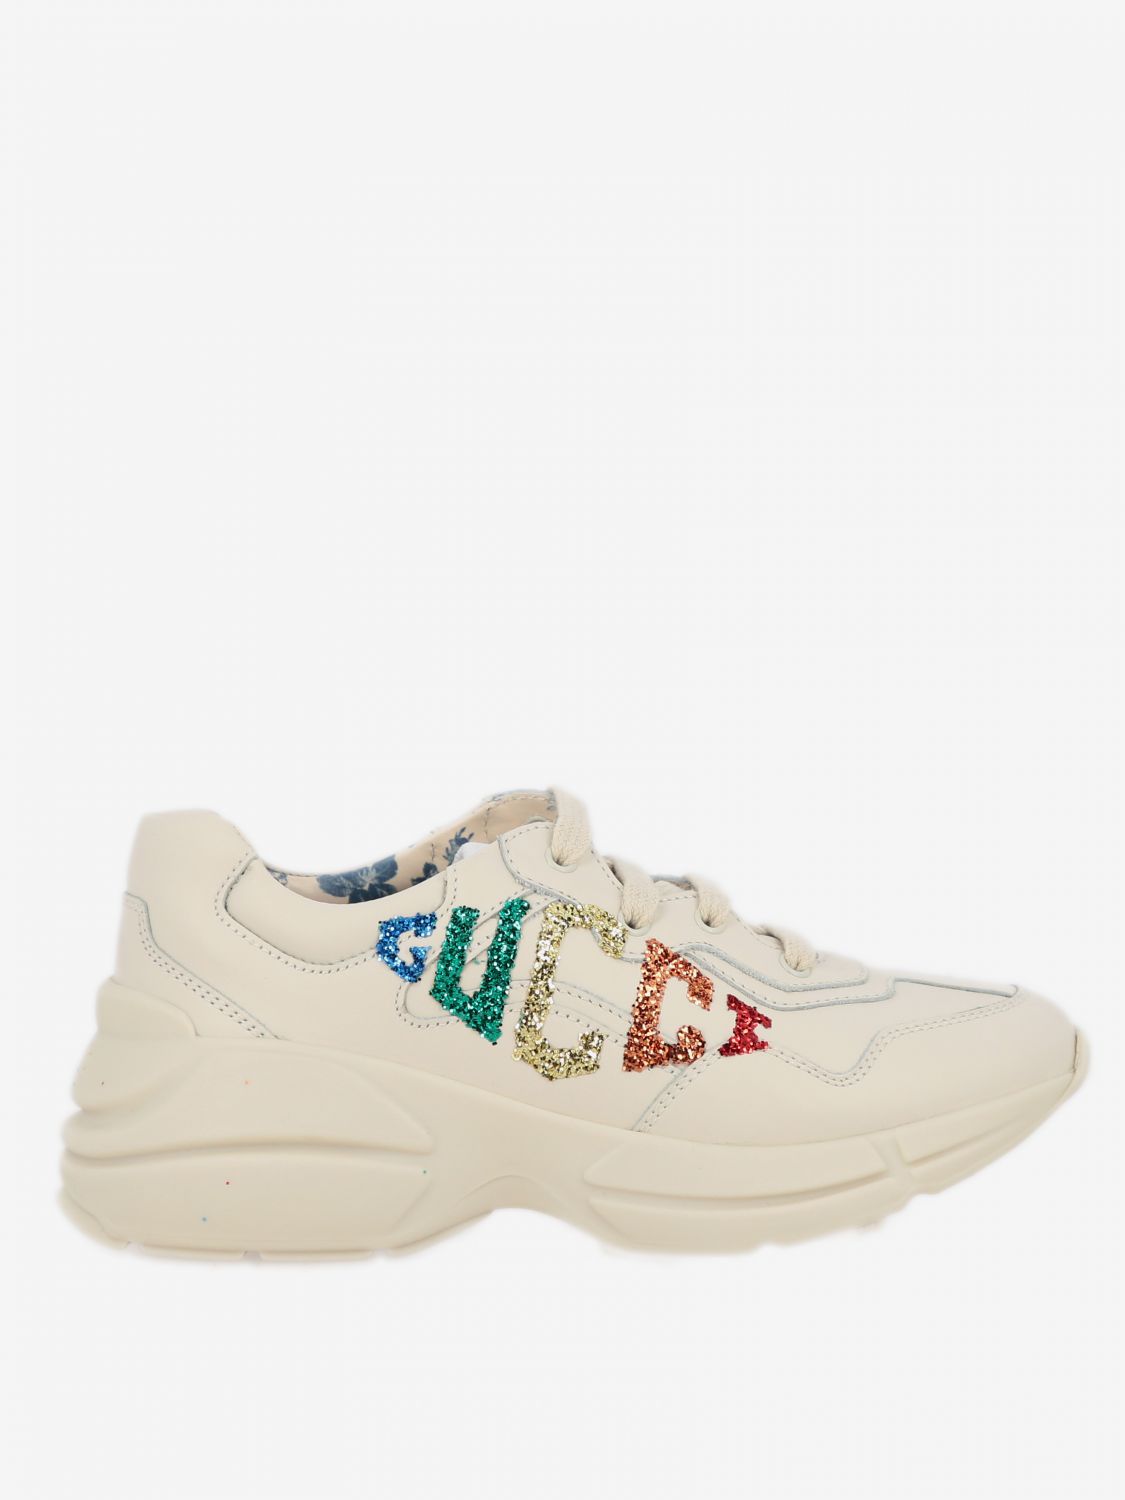 GUCCI: Rhyton leather sneakers with glitter logo | Shoes Gucci Kids ...